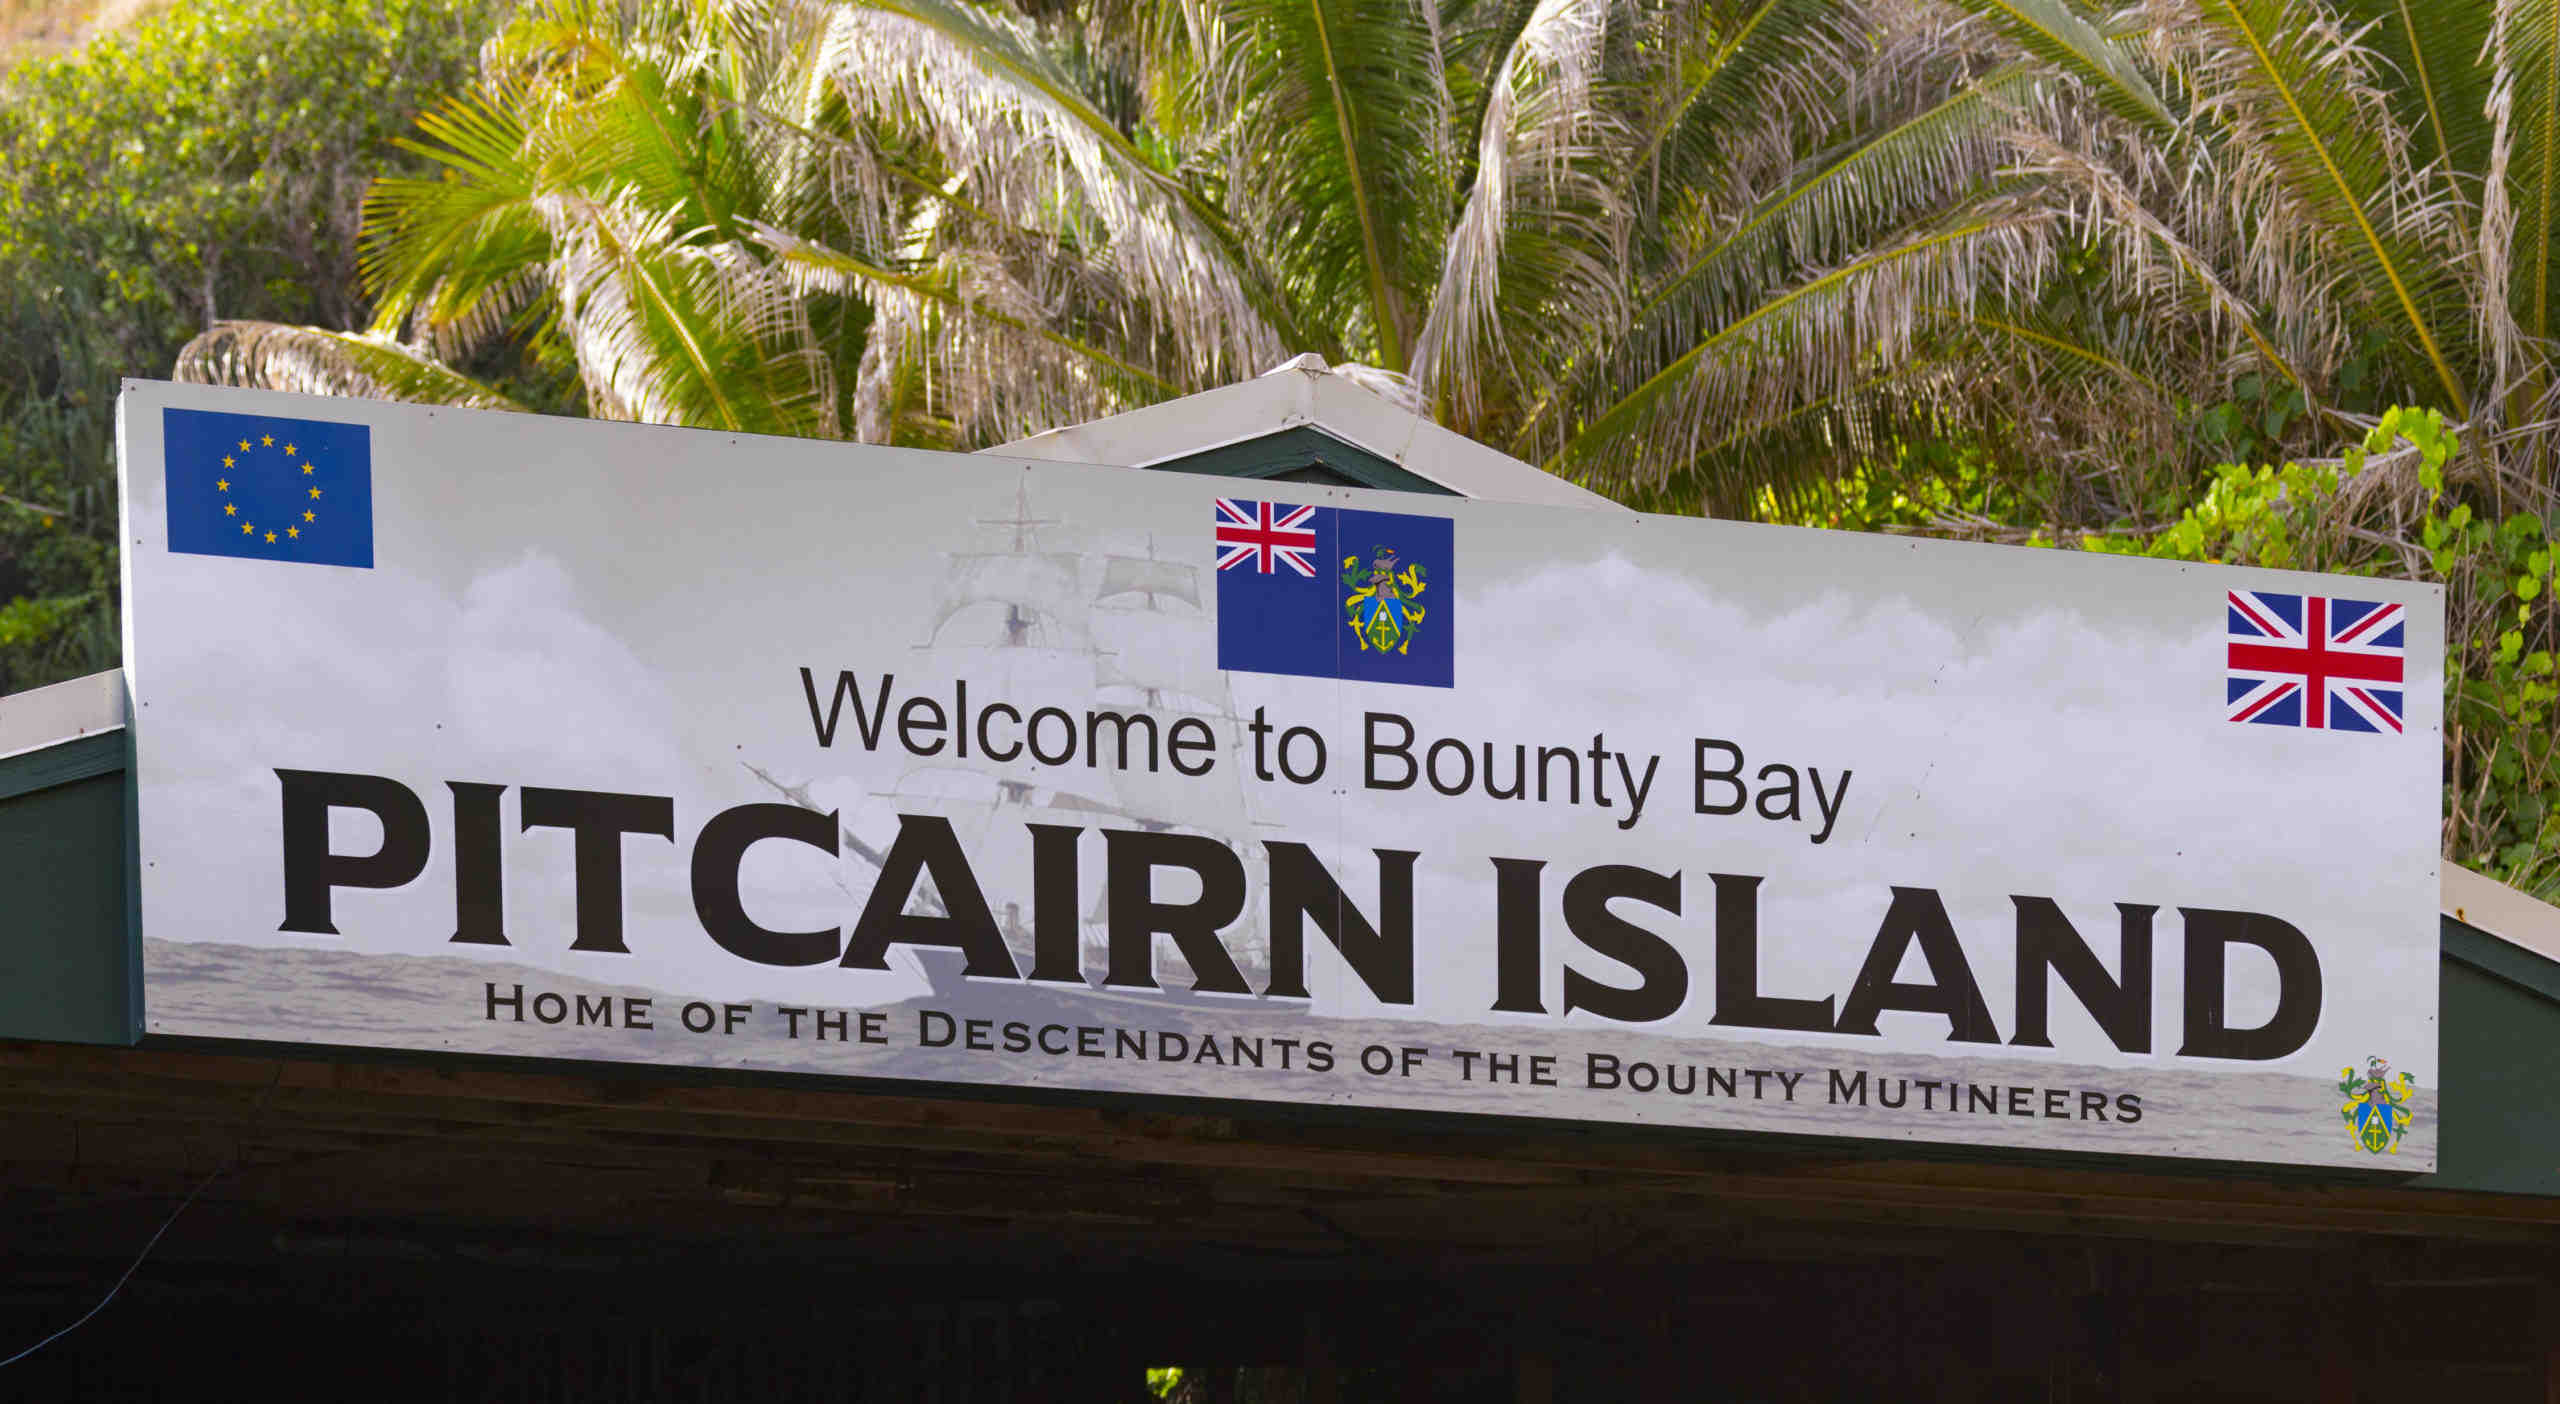 What is Pitcairn Island famous for?